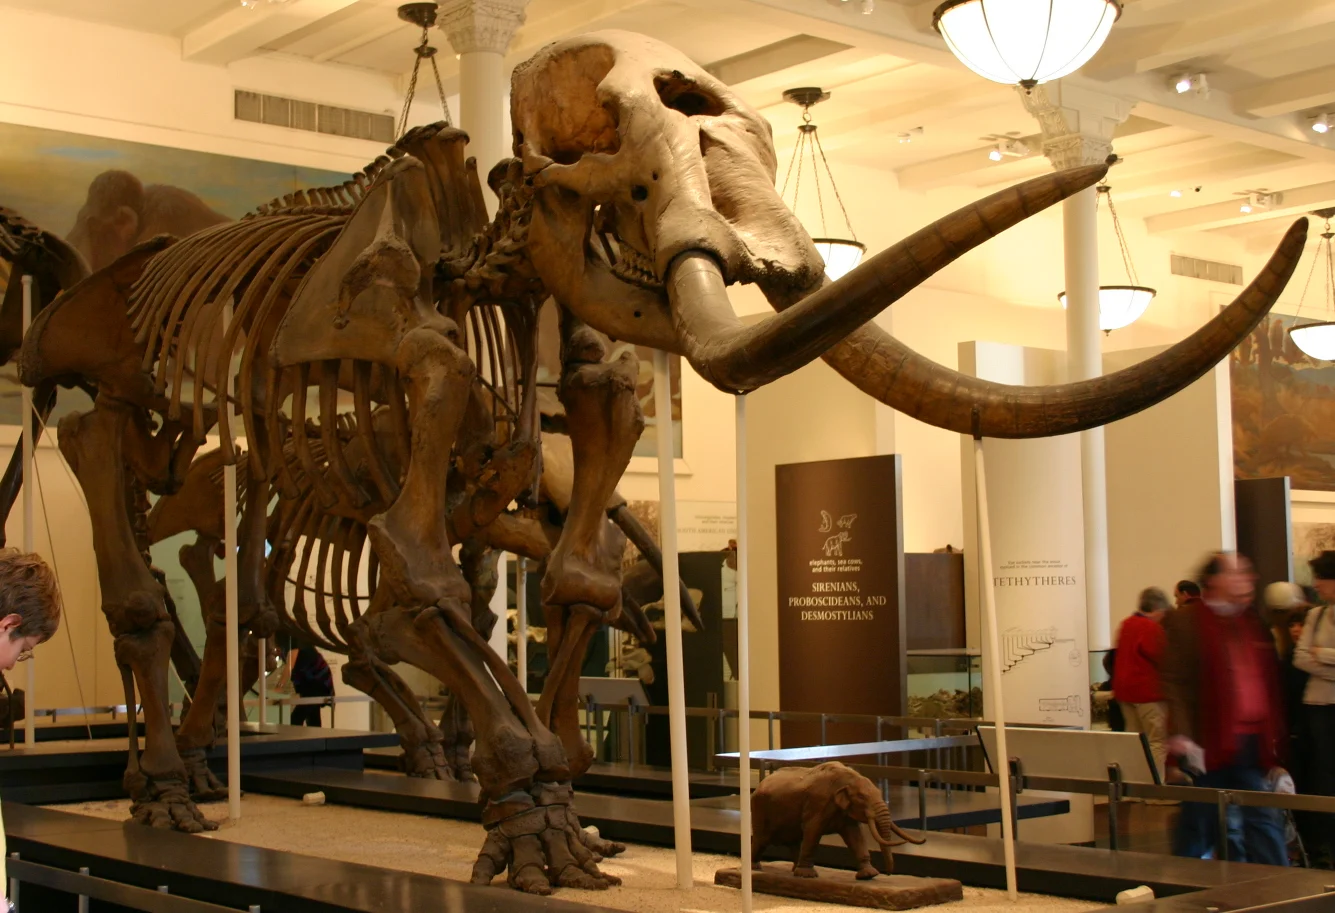 A skeleton of a Mastodon in a museum setting